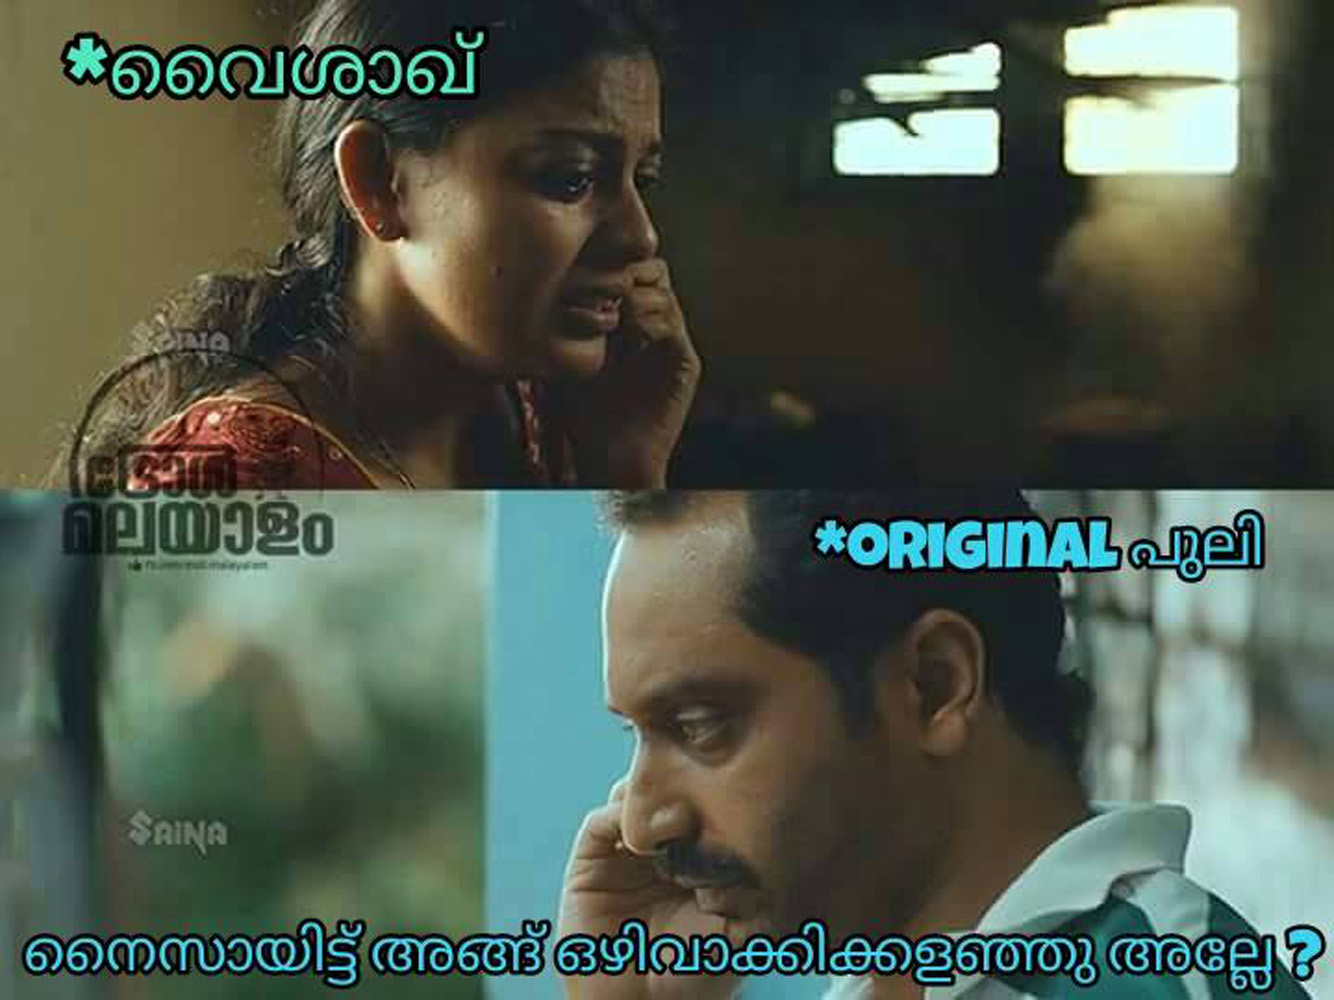 Image result for malayalam funny trolls